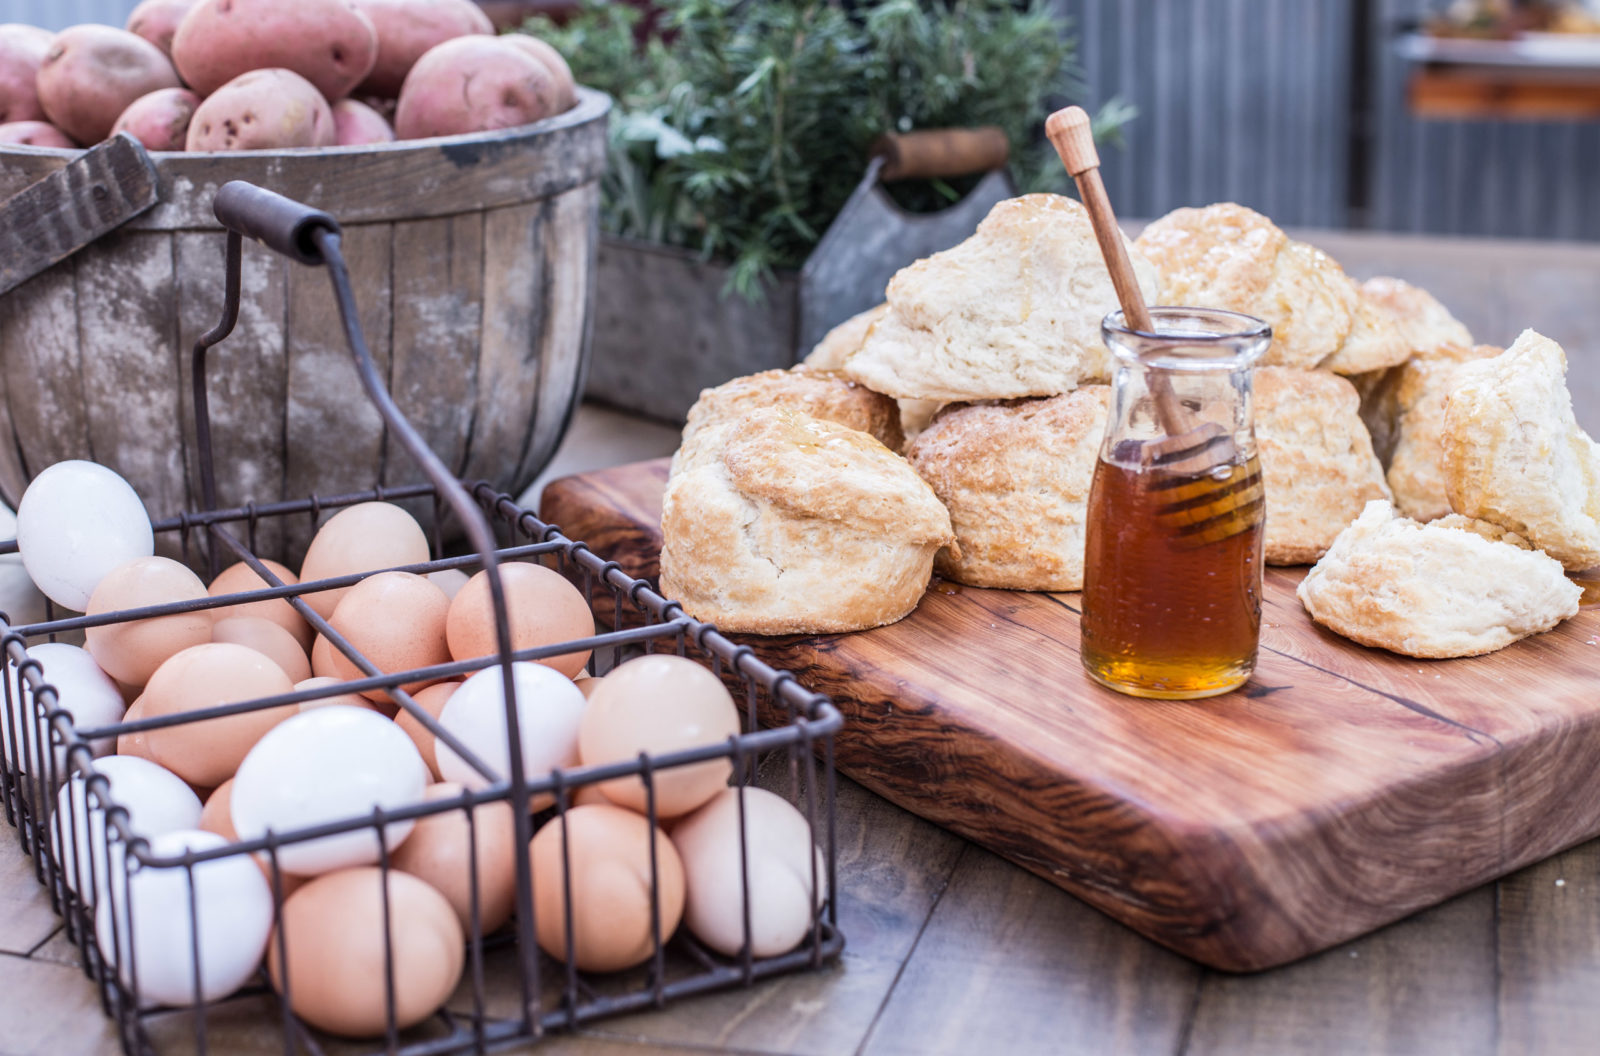 biscuits with jar of honey, basket of eggs, and basket of potatoes